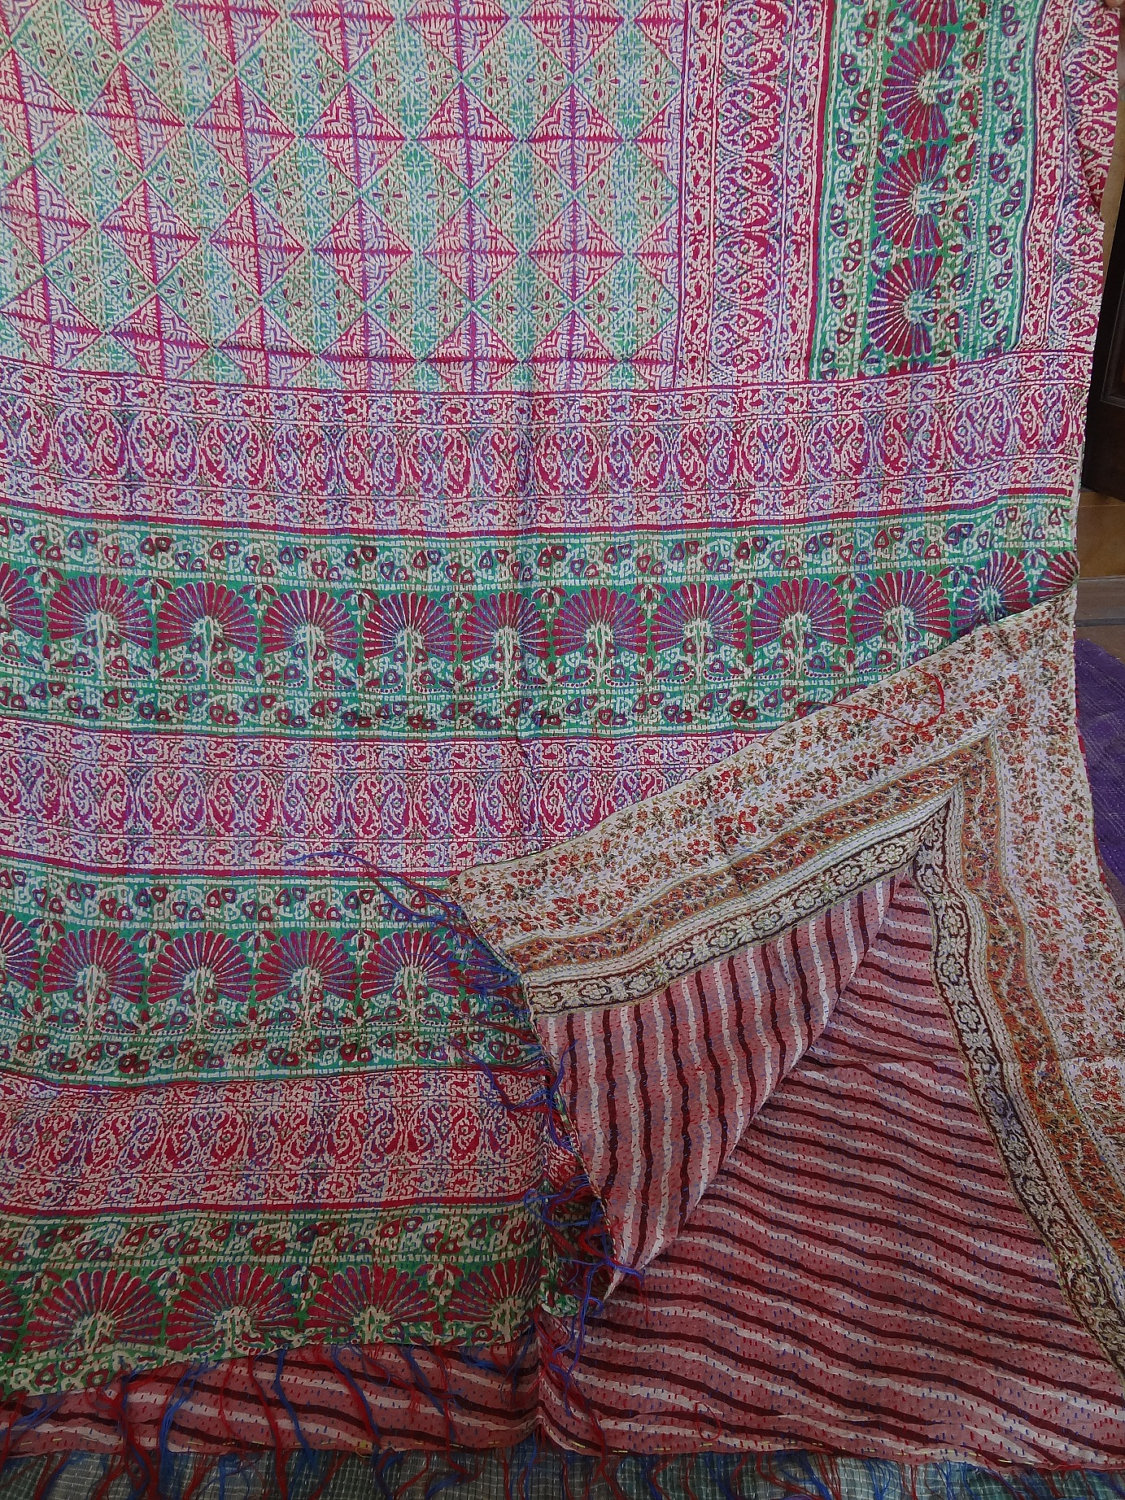 old textile from rajasthan and around: vintage kantha quilts